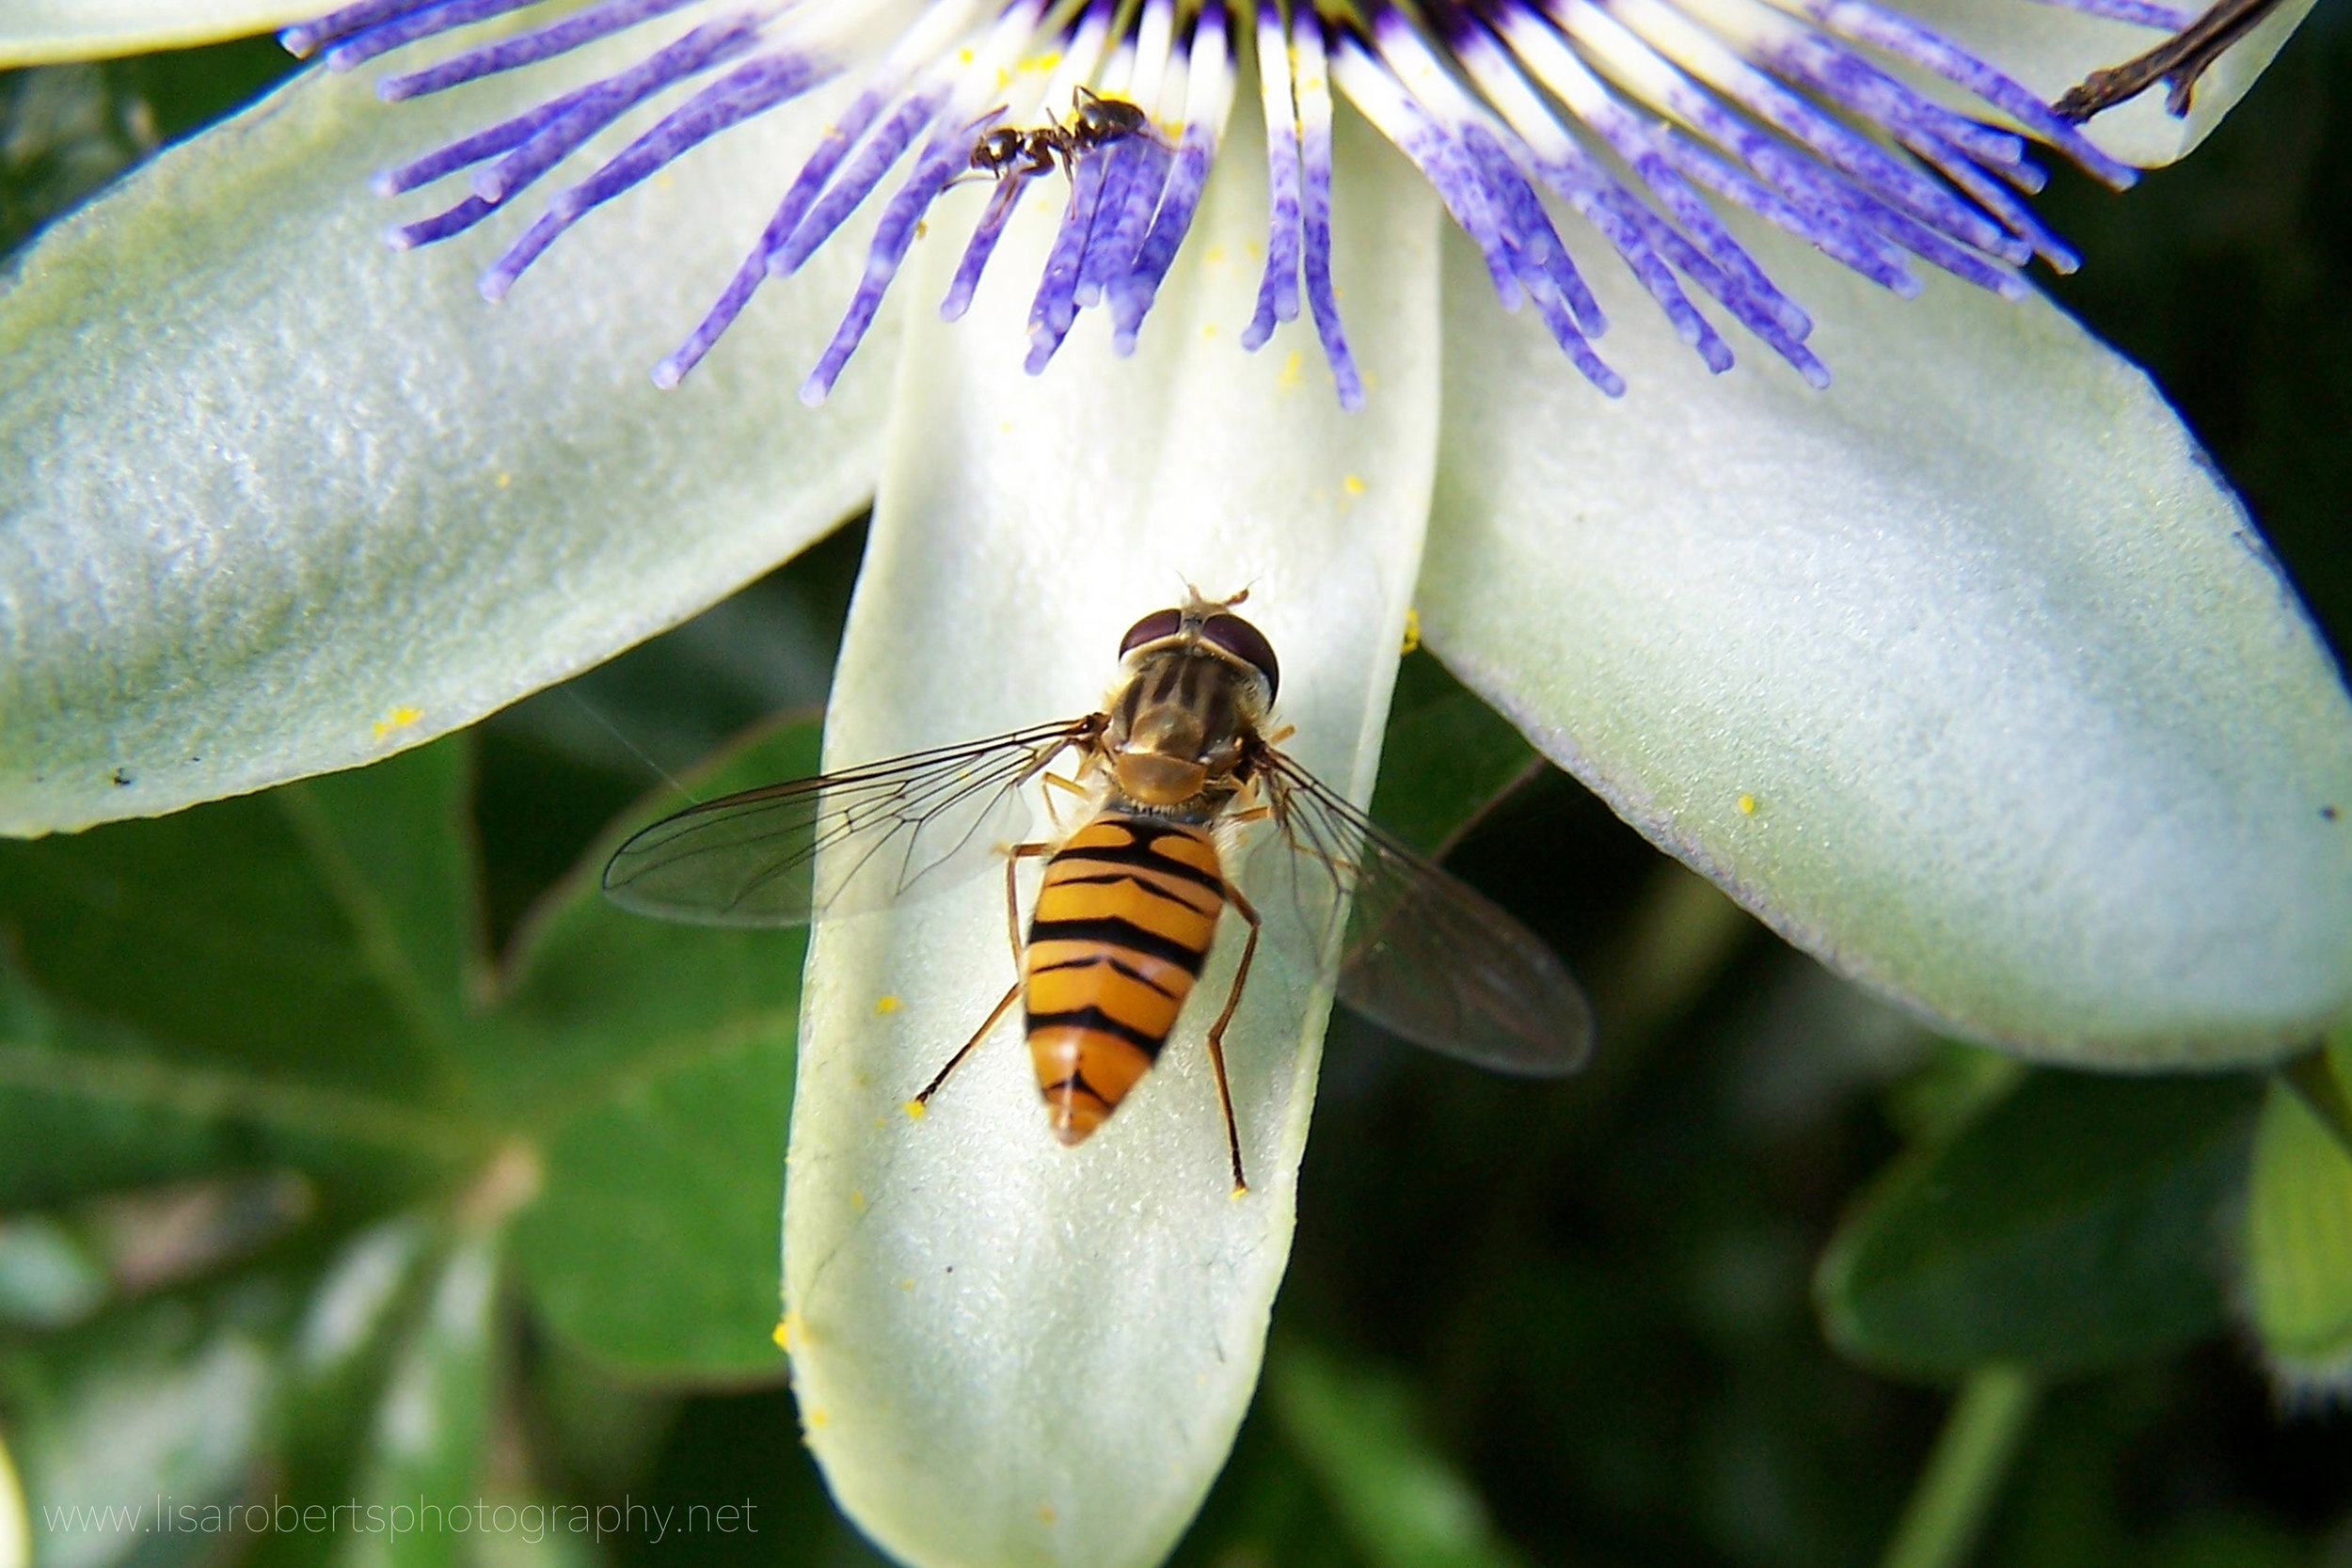  Hoverfly on Passion flower 